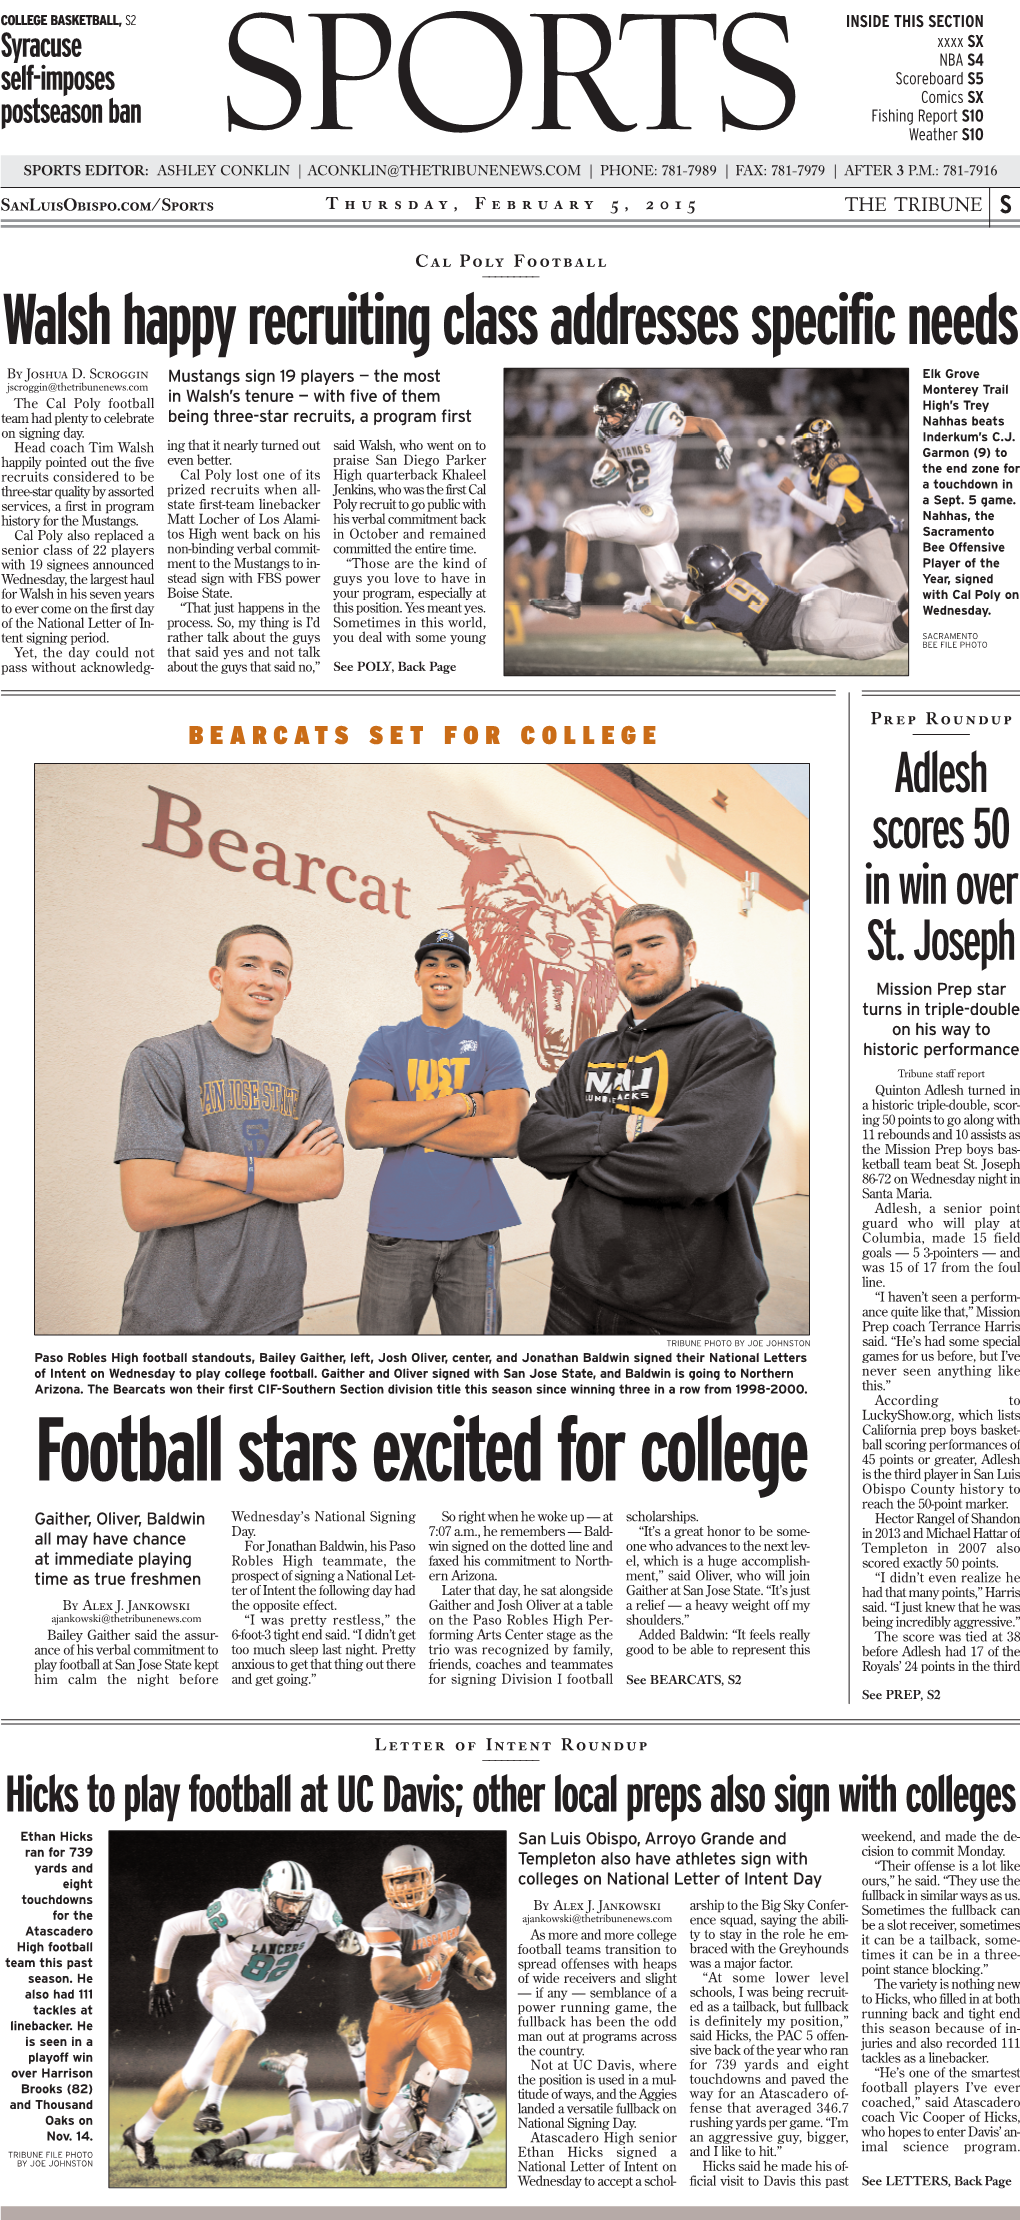 Football Stars Excited for College Is the Third Player in San Luis Obispo County History to Reach the 50-Point Marker